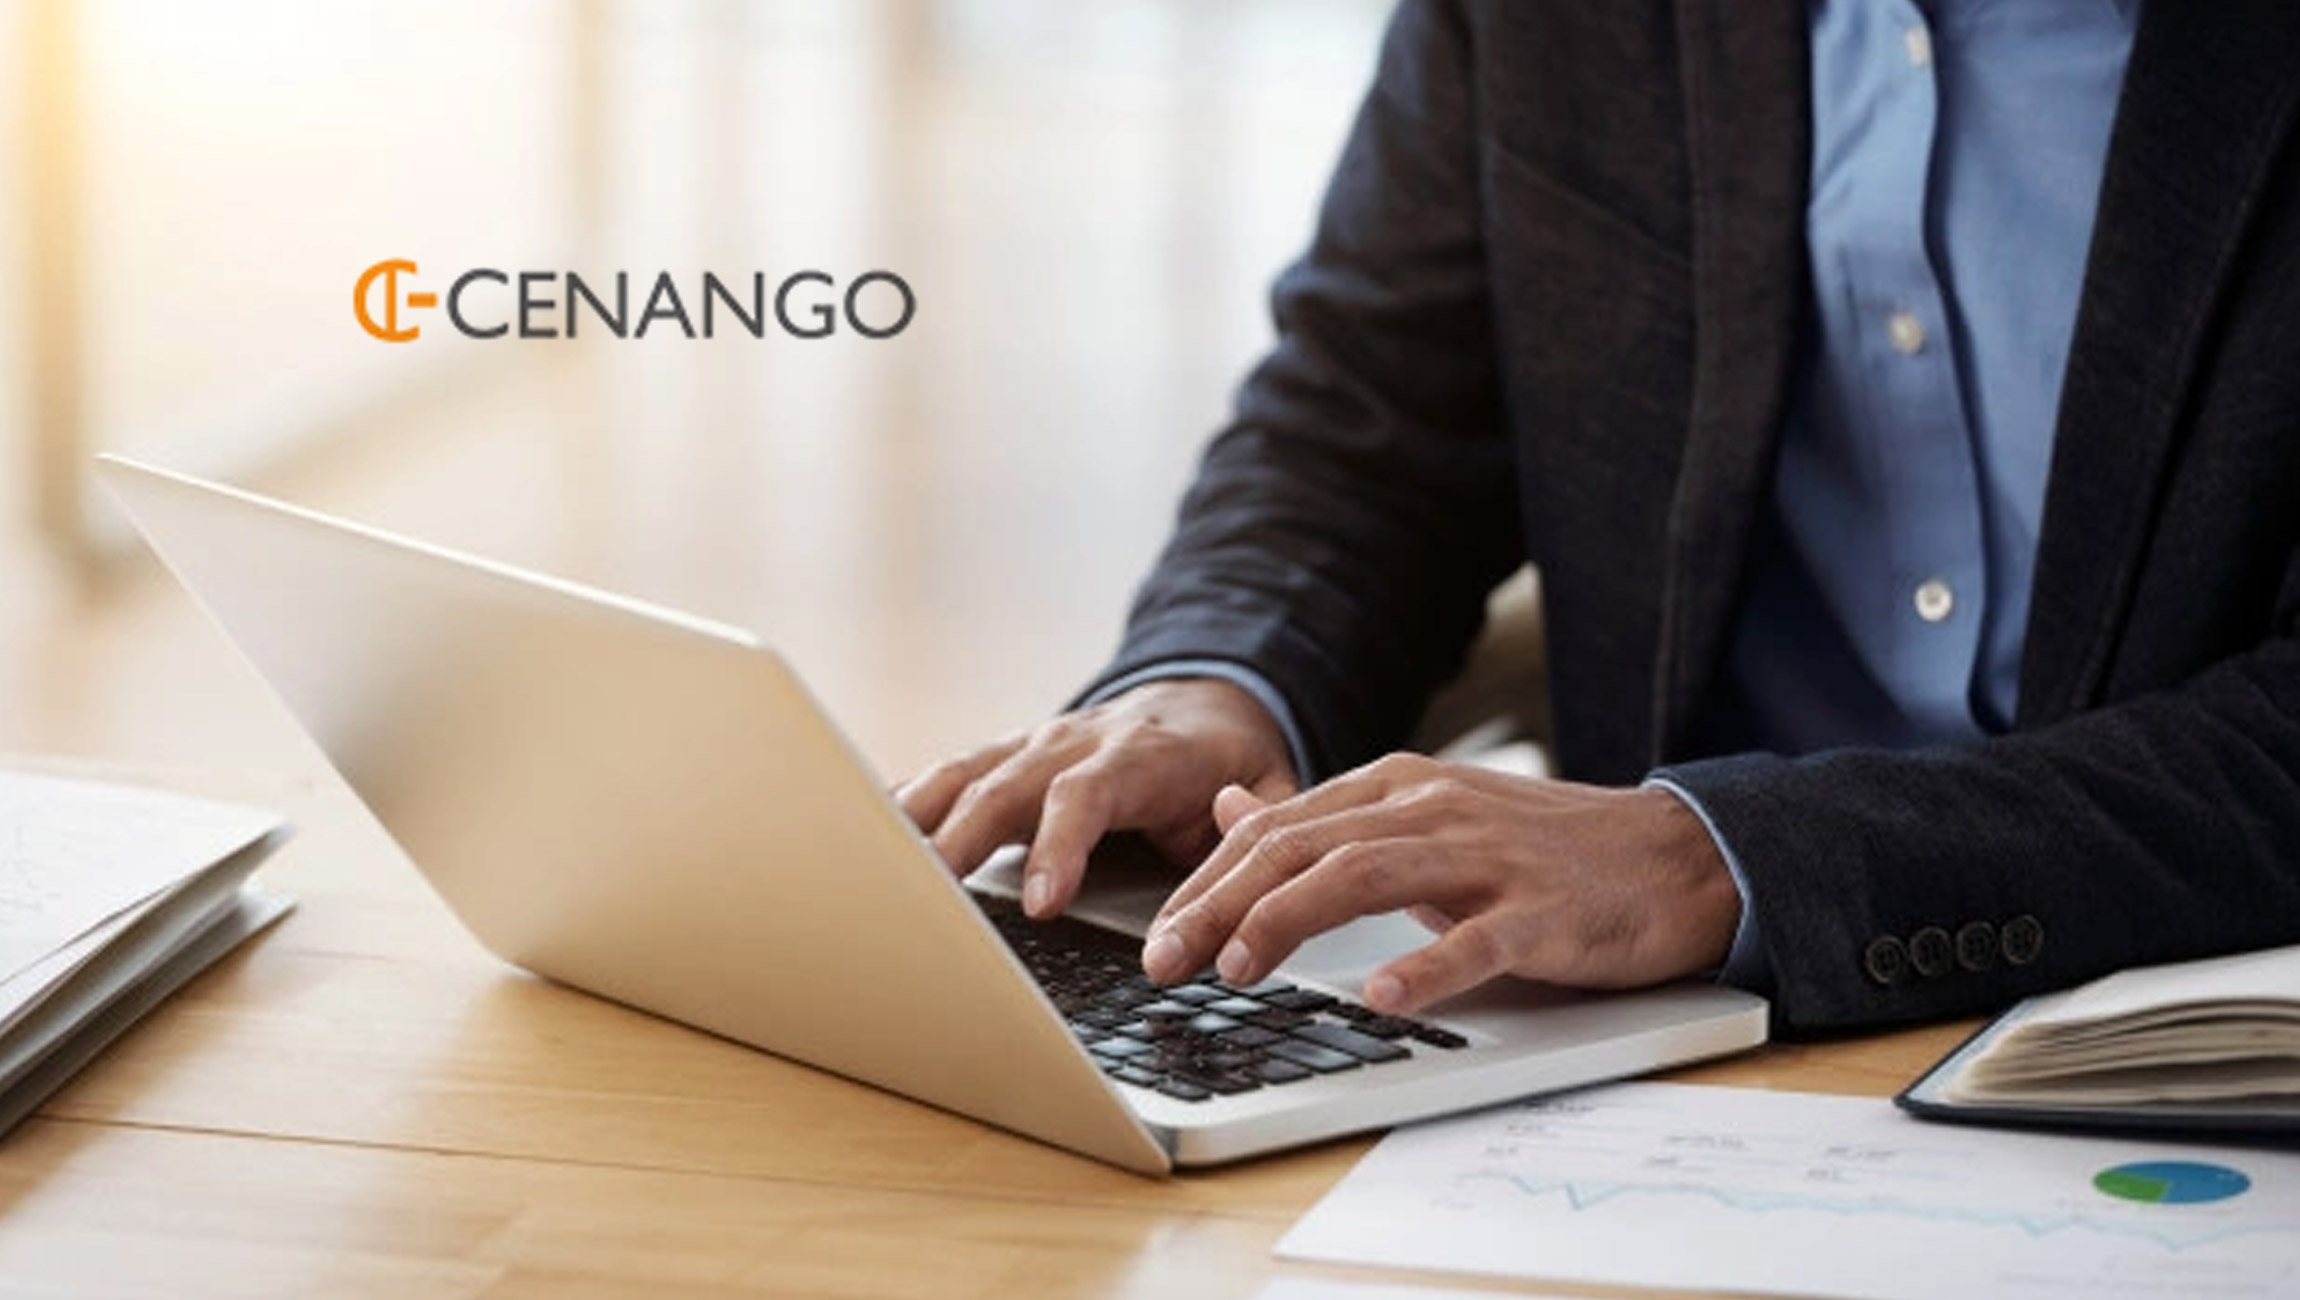 Cenango Unveils the RMR 1.0, the Next Gen in RFID Technology for Asset Management